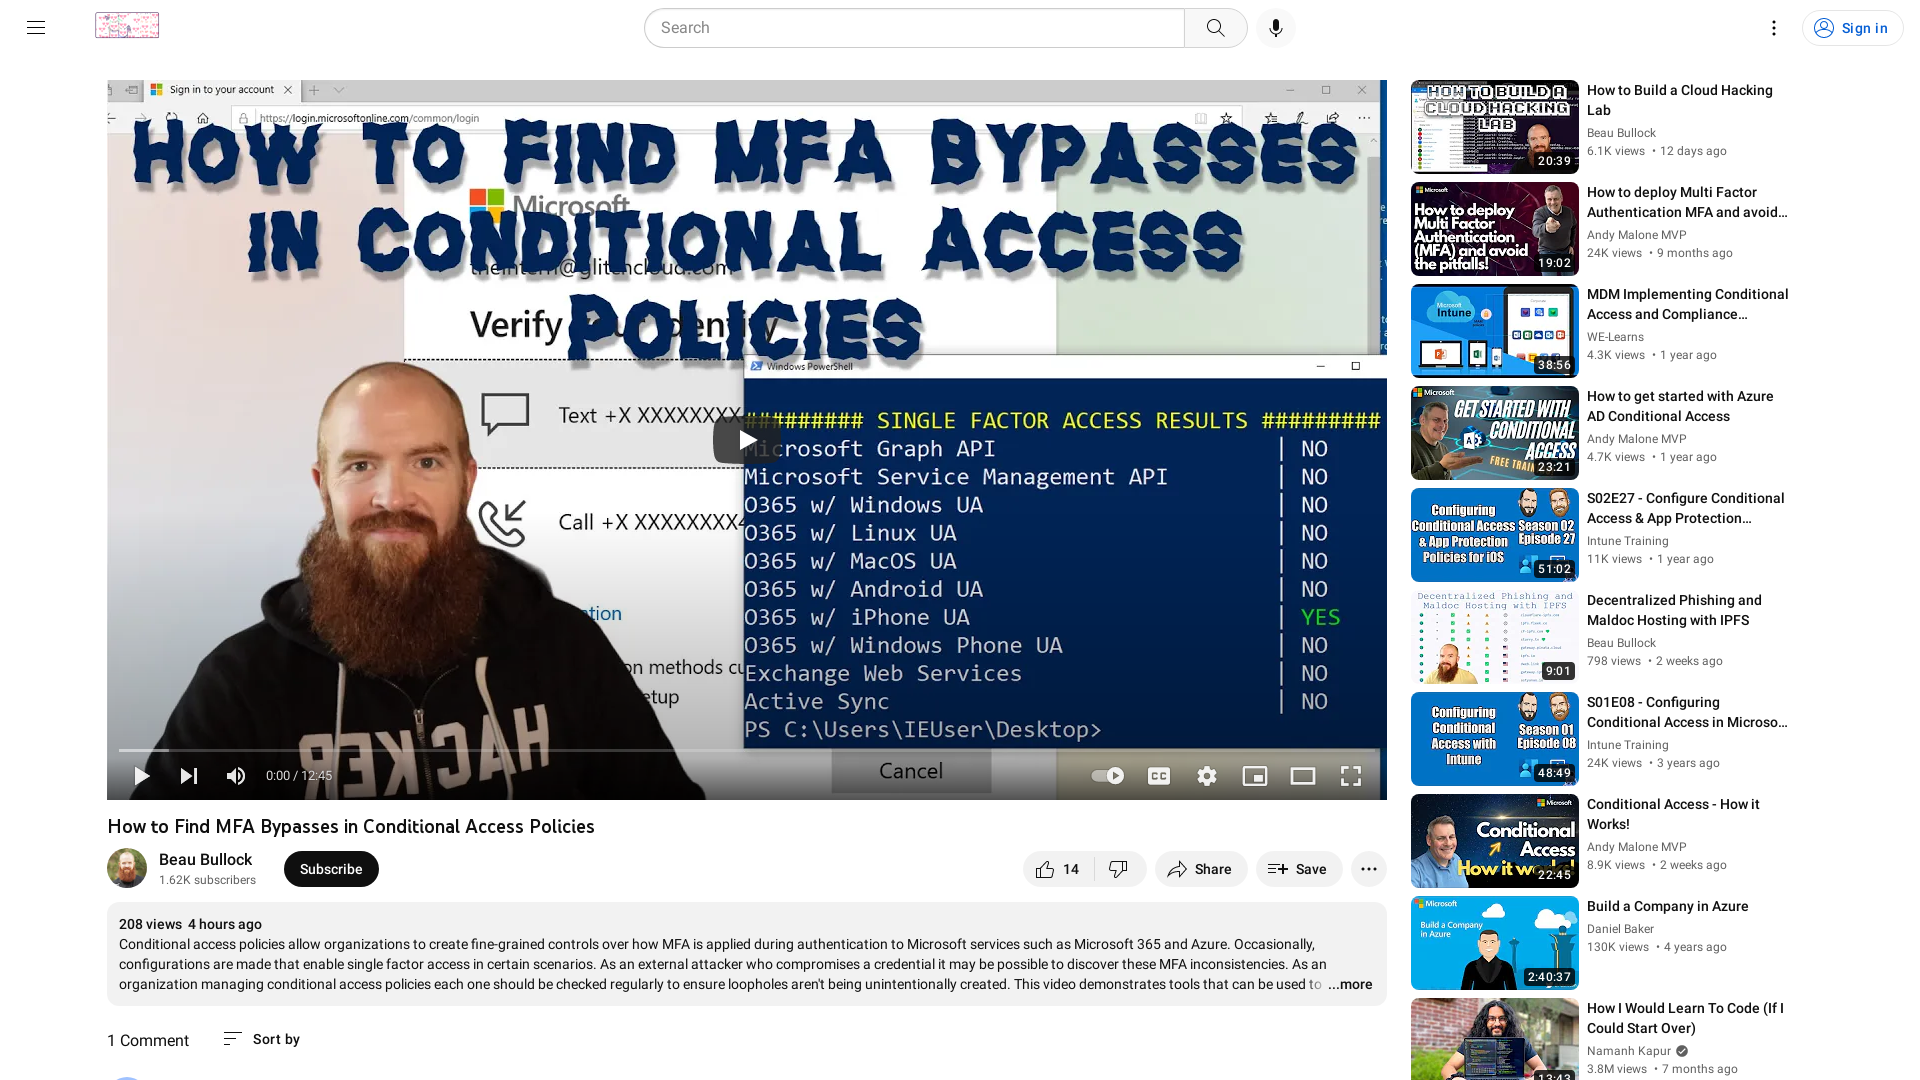 How to Find MFA Bypasses in Conditional Access Policies - YouTube